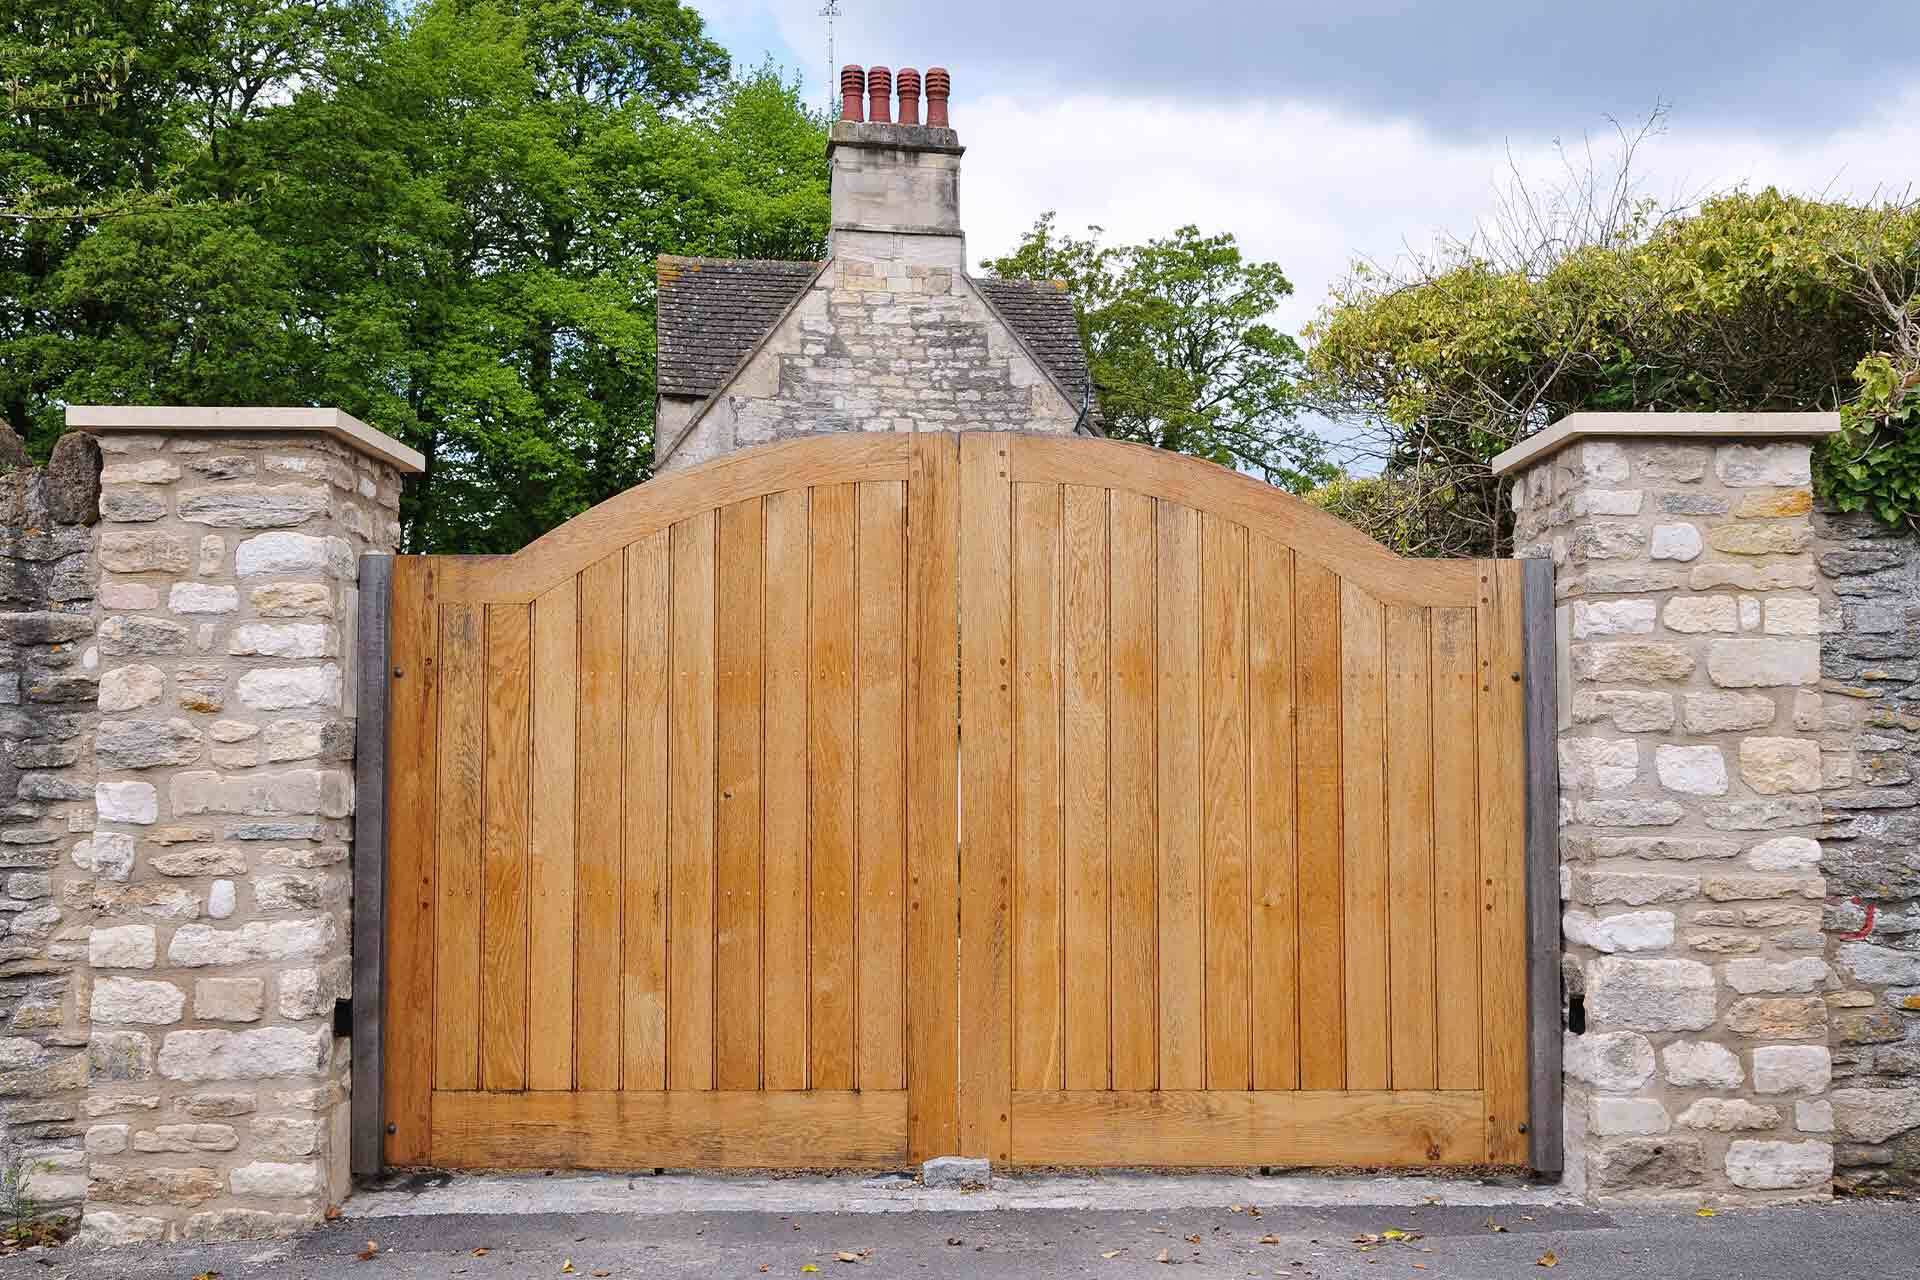 How To Build A Wooden Gate